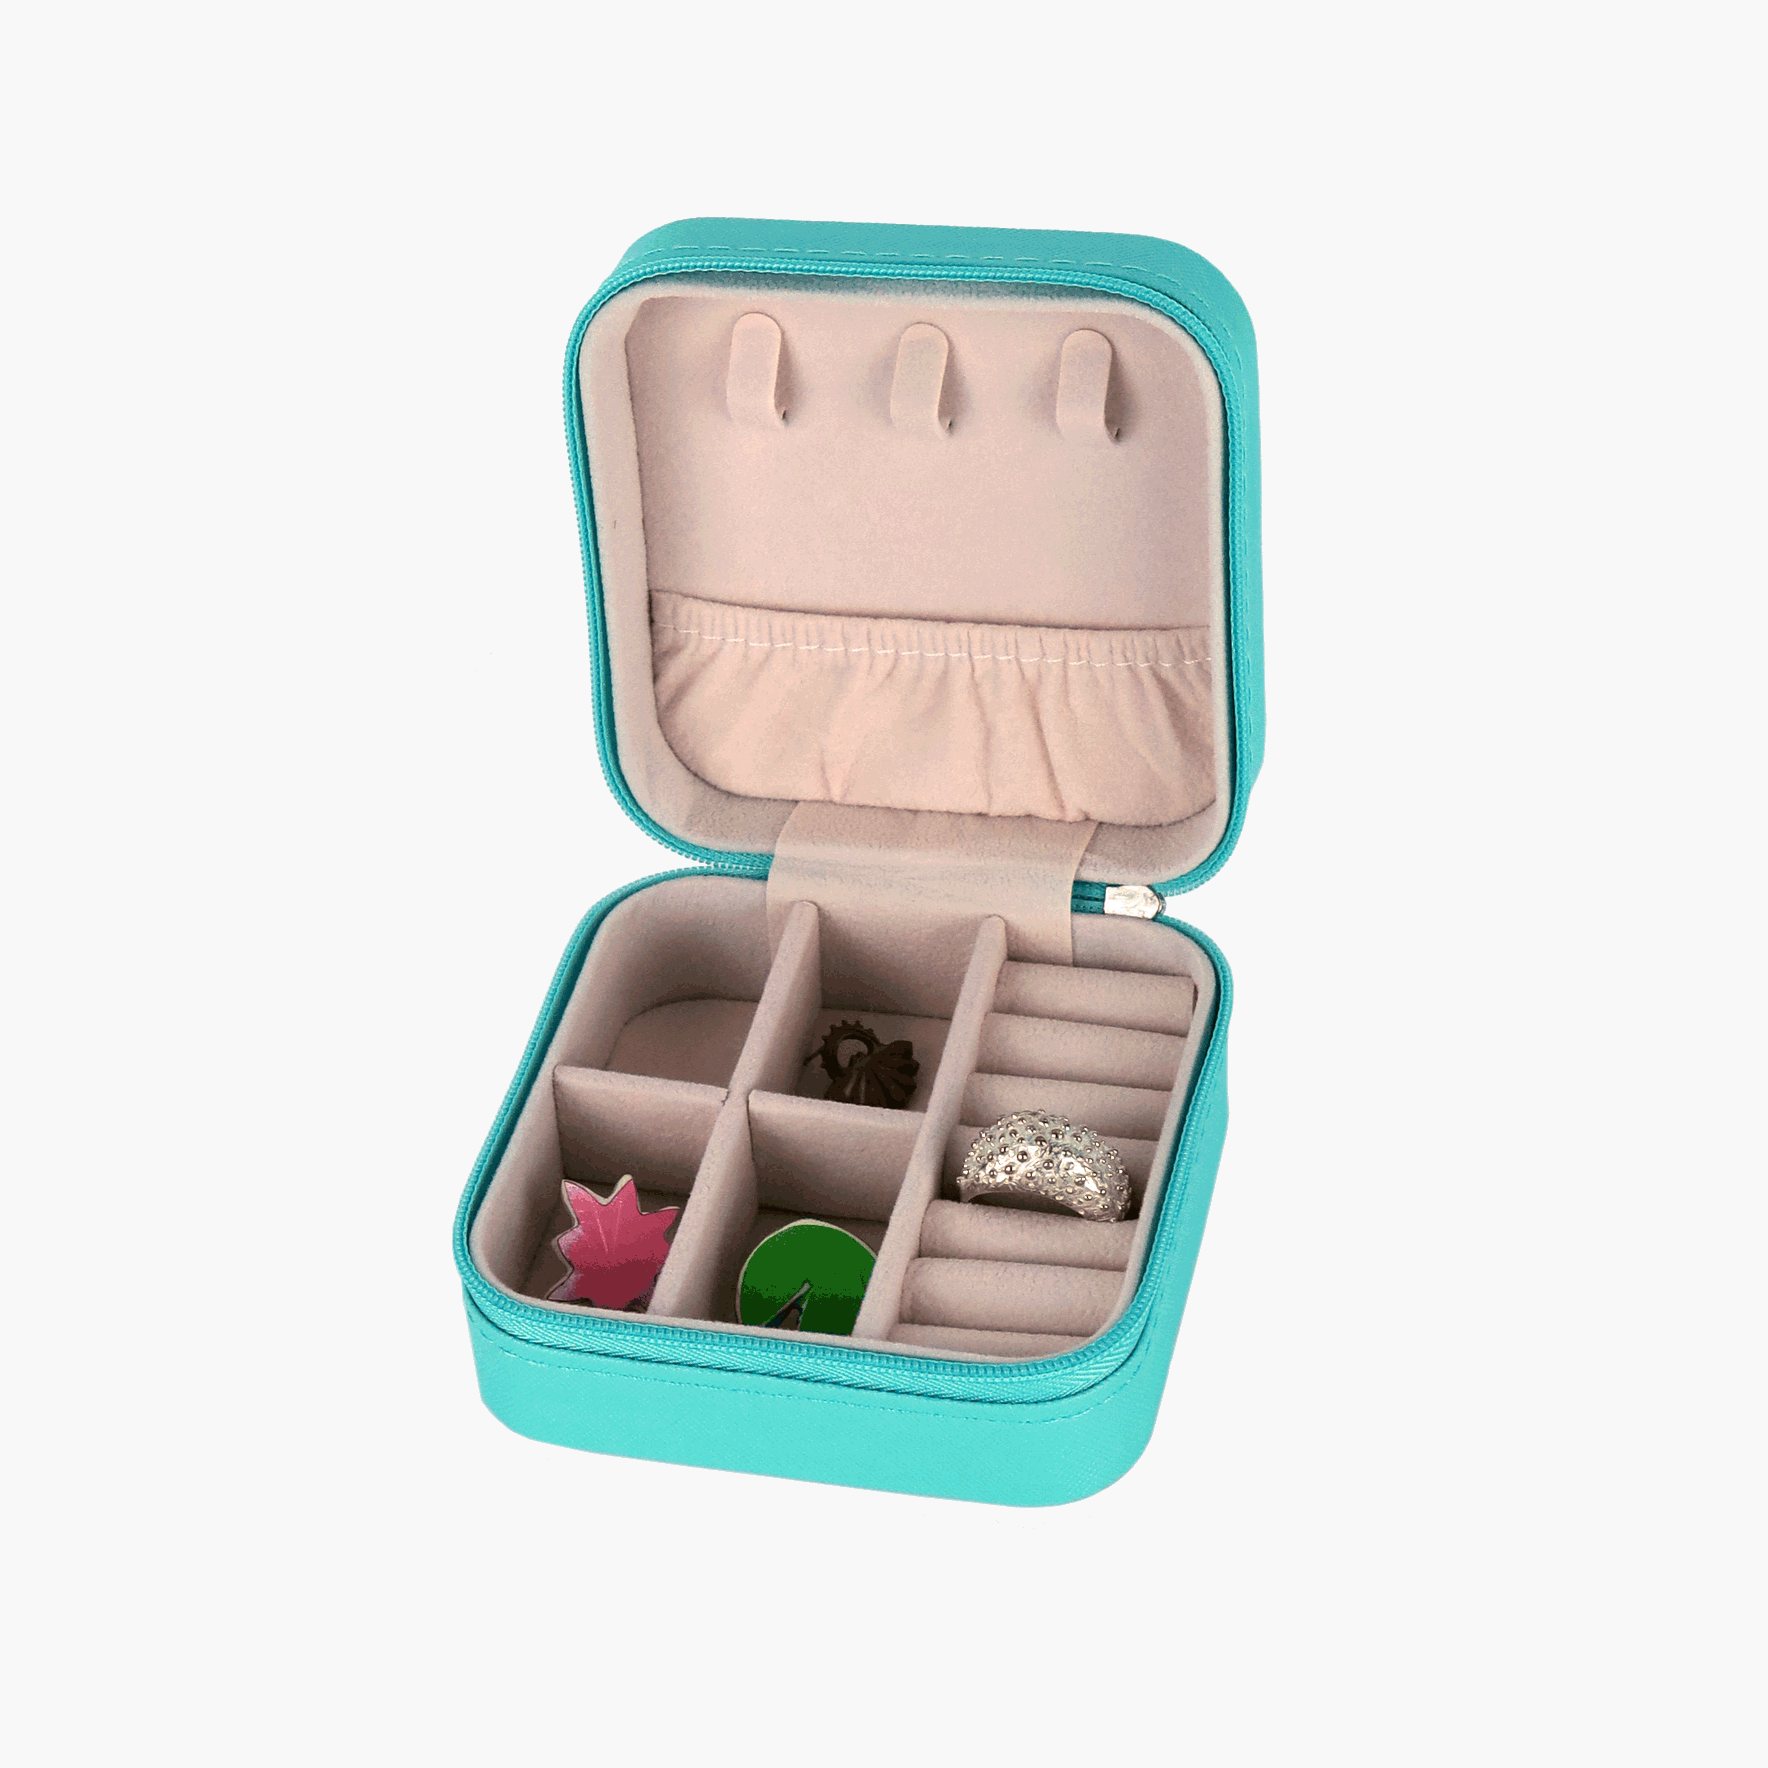 Small square turquoise jewellery travel case.  The case has a zipper and holds four pairs of earrings, six rings and three chains.